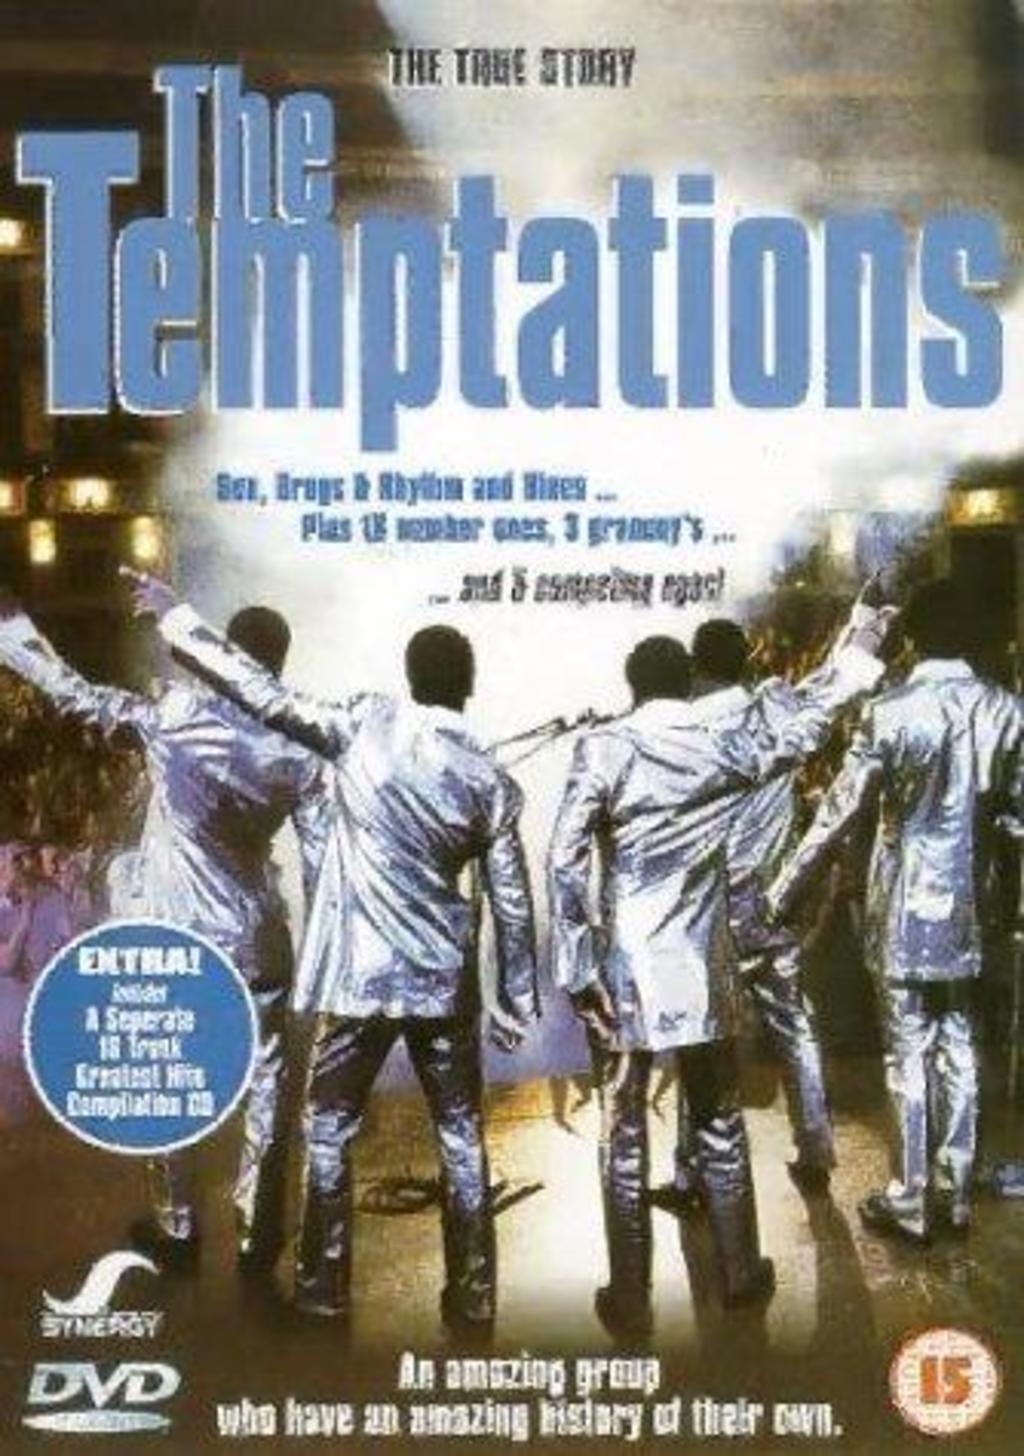 Watch The Temptations on Netflix Today!